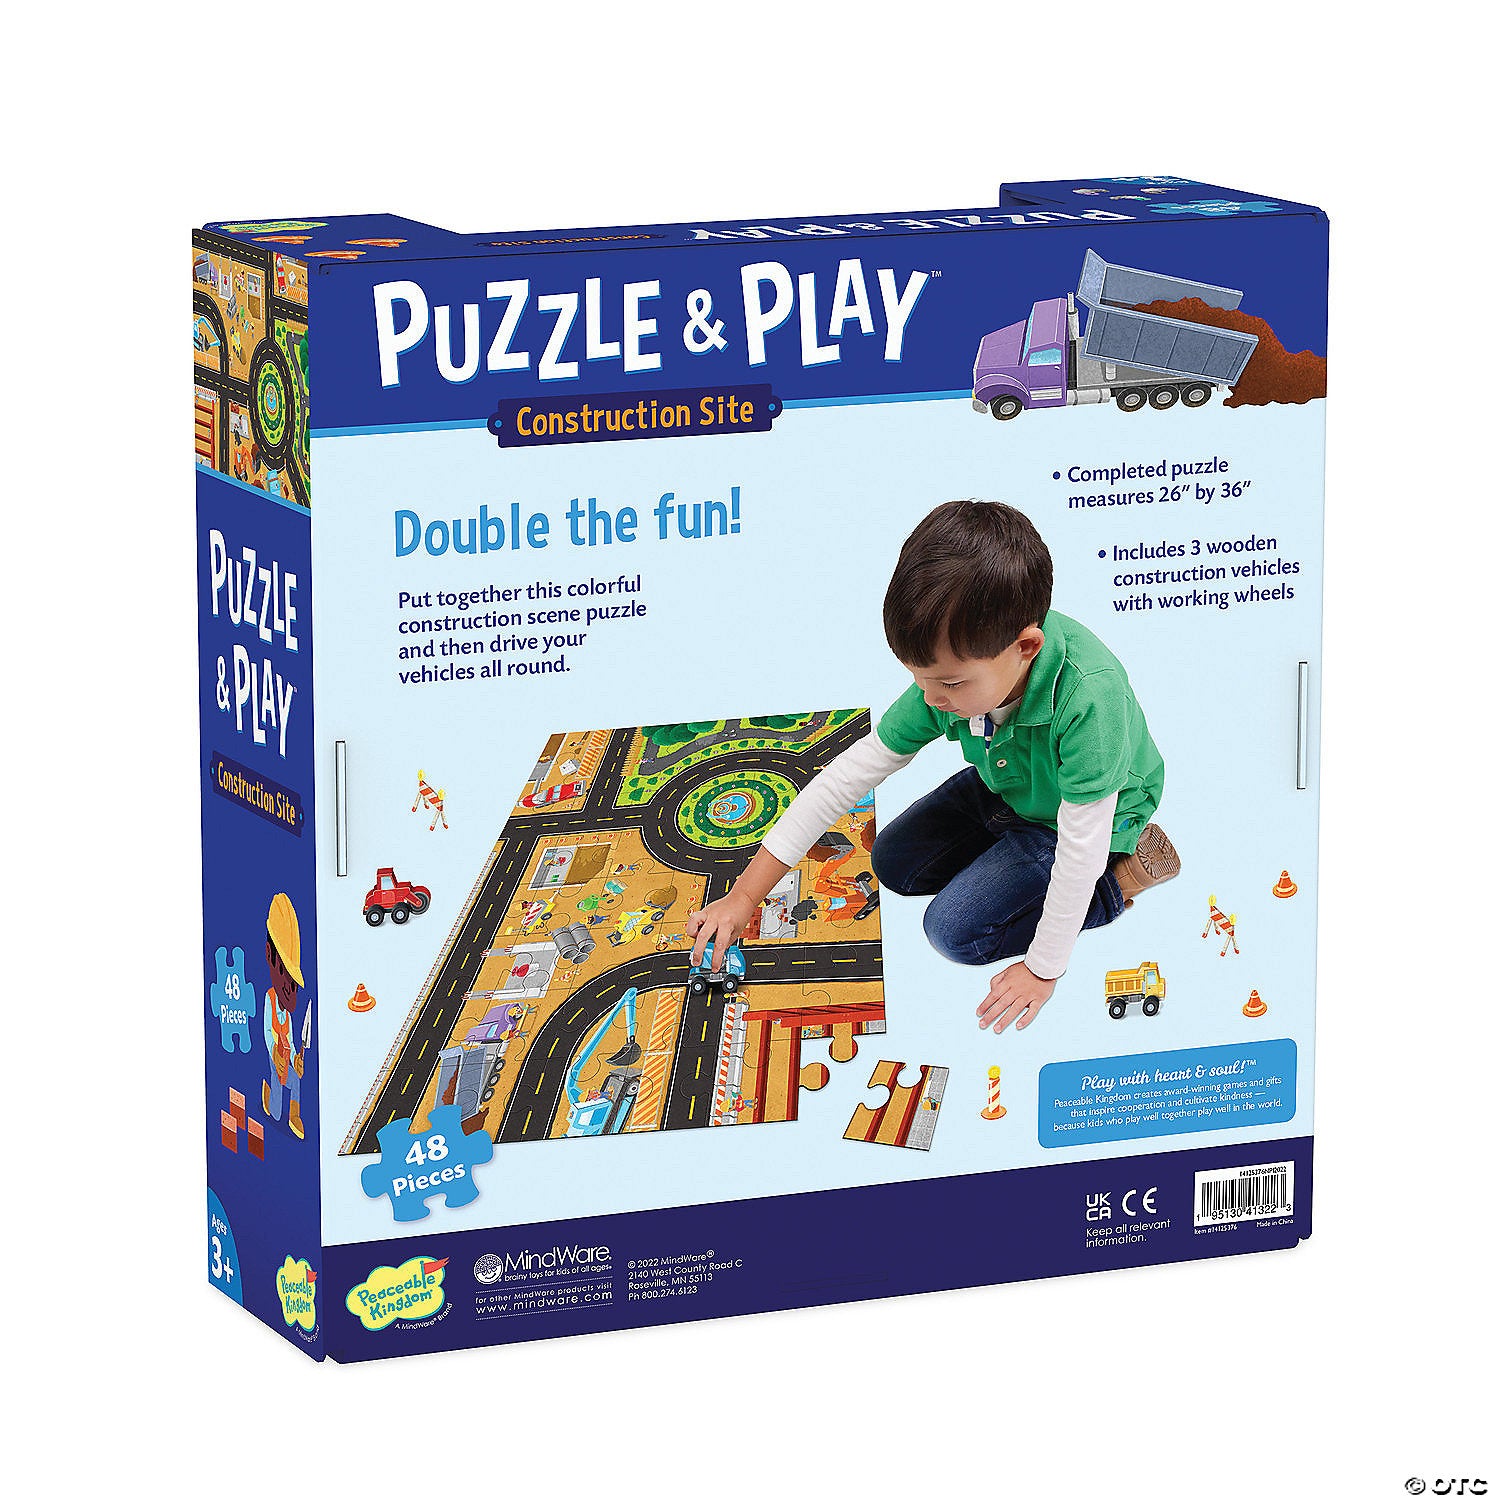 Puzzle and Play Construction Site